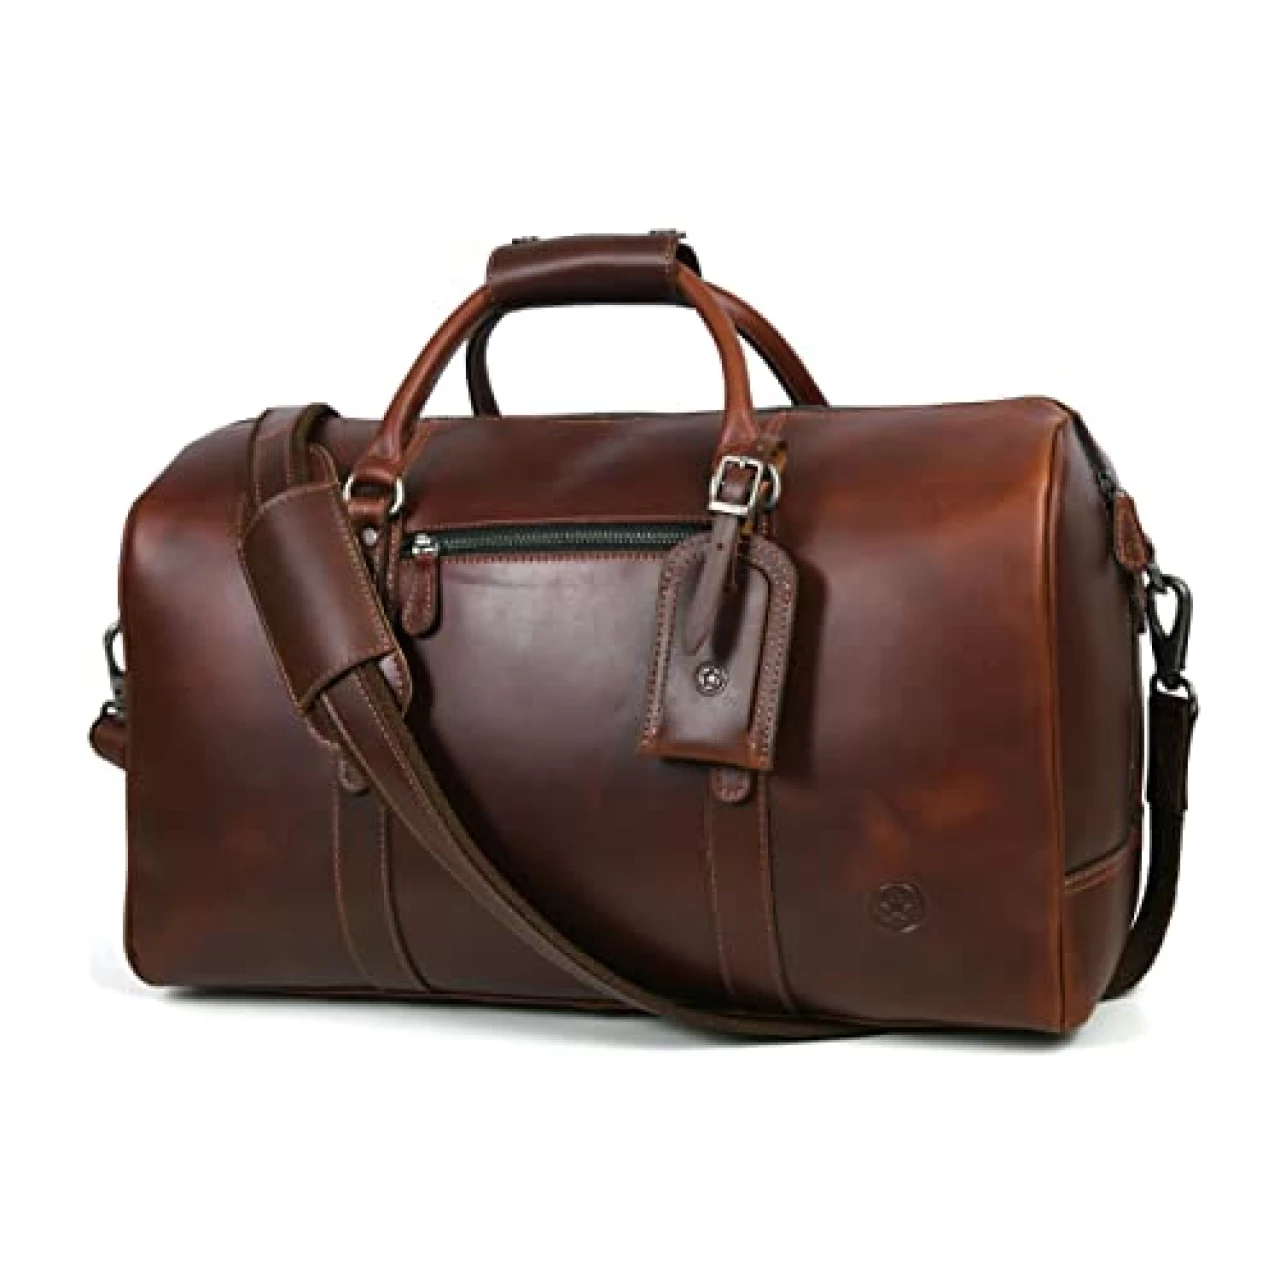 Leather Travel Duffel Bag | Gym Sports Bag Airplane Luggage Carry-On Bag | Gift for Father&rsquo;s Day By Aaron Leather Goods (Chestnut II) 20 x 11 x 9 Inch